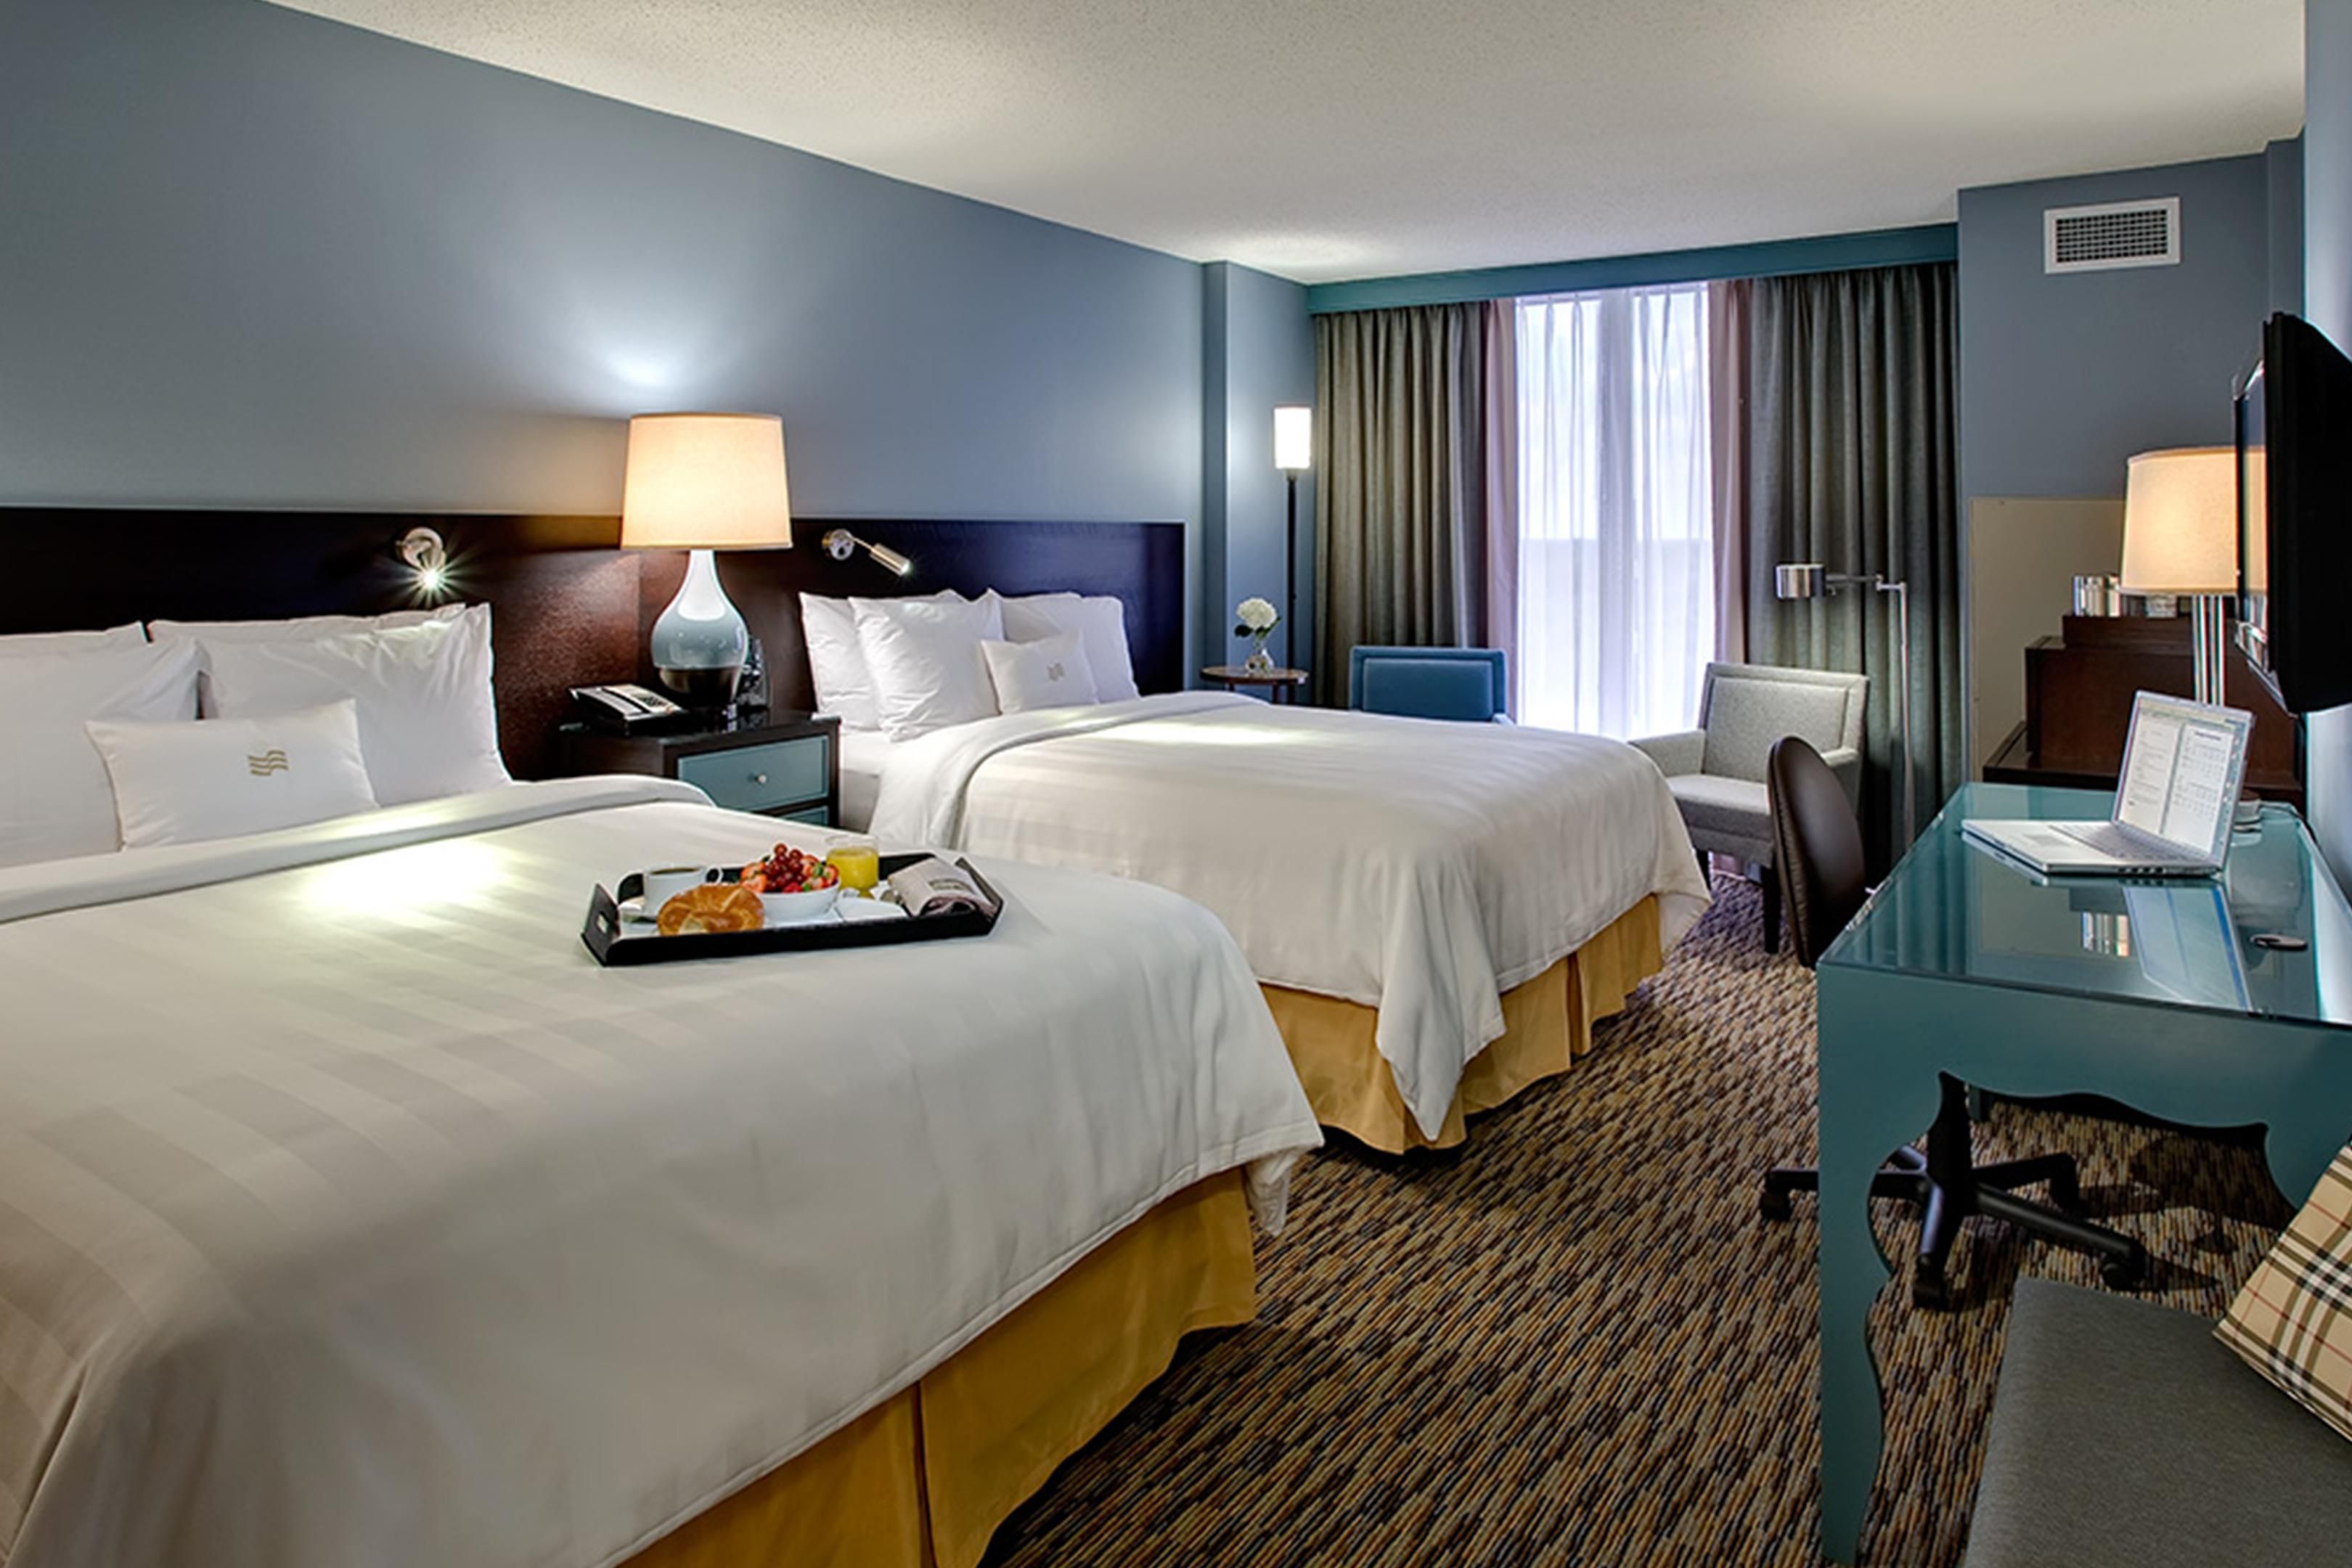 Make yourself at home in our Superior Two Queen Beds room.